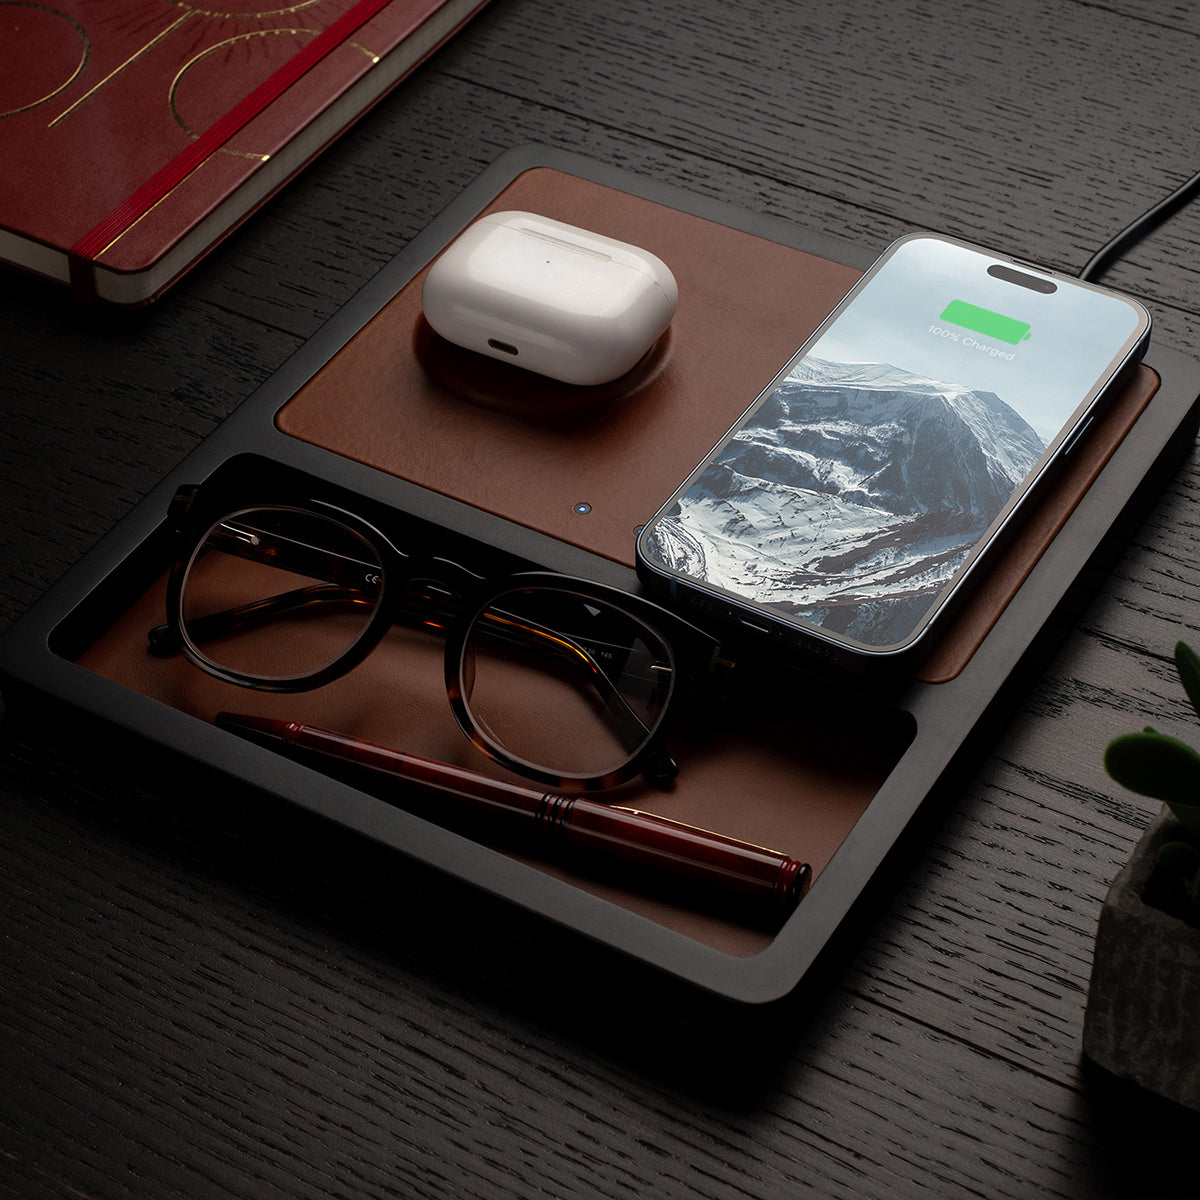 DUO TRAY Saddle - 2-in-1 MagSafe Midnight Black Wireless Charger with USB-C and A Ports Support